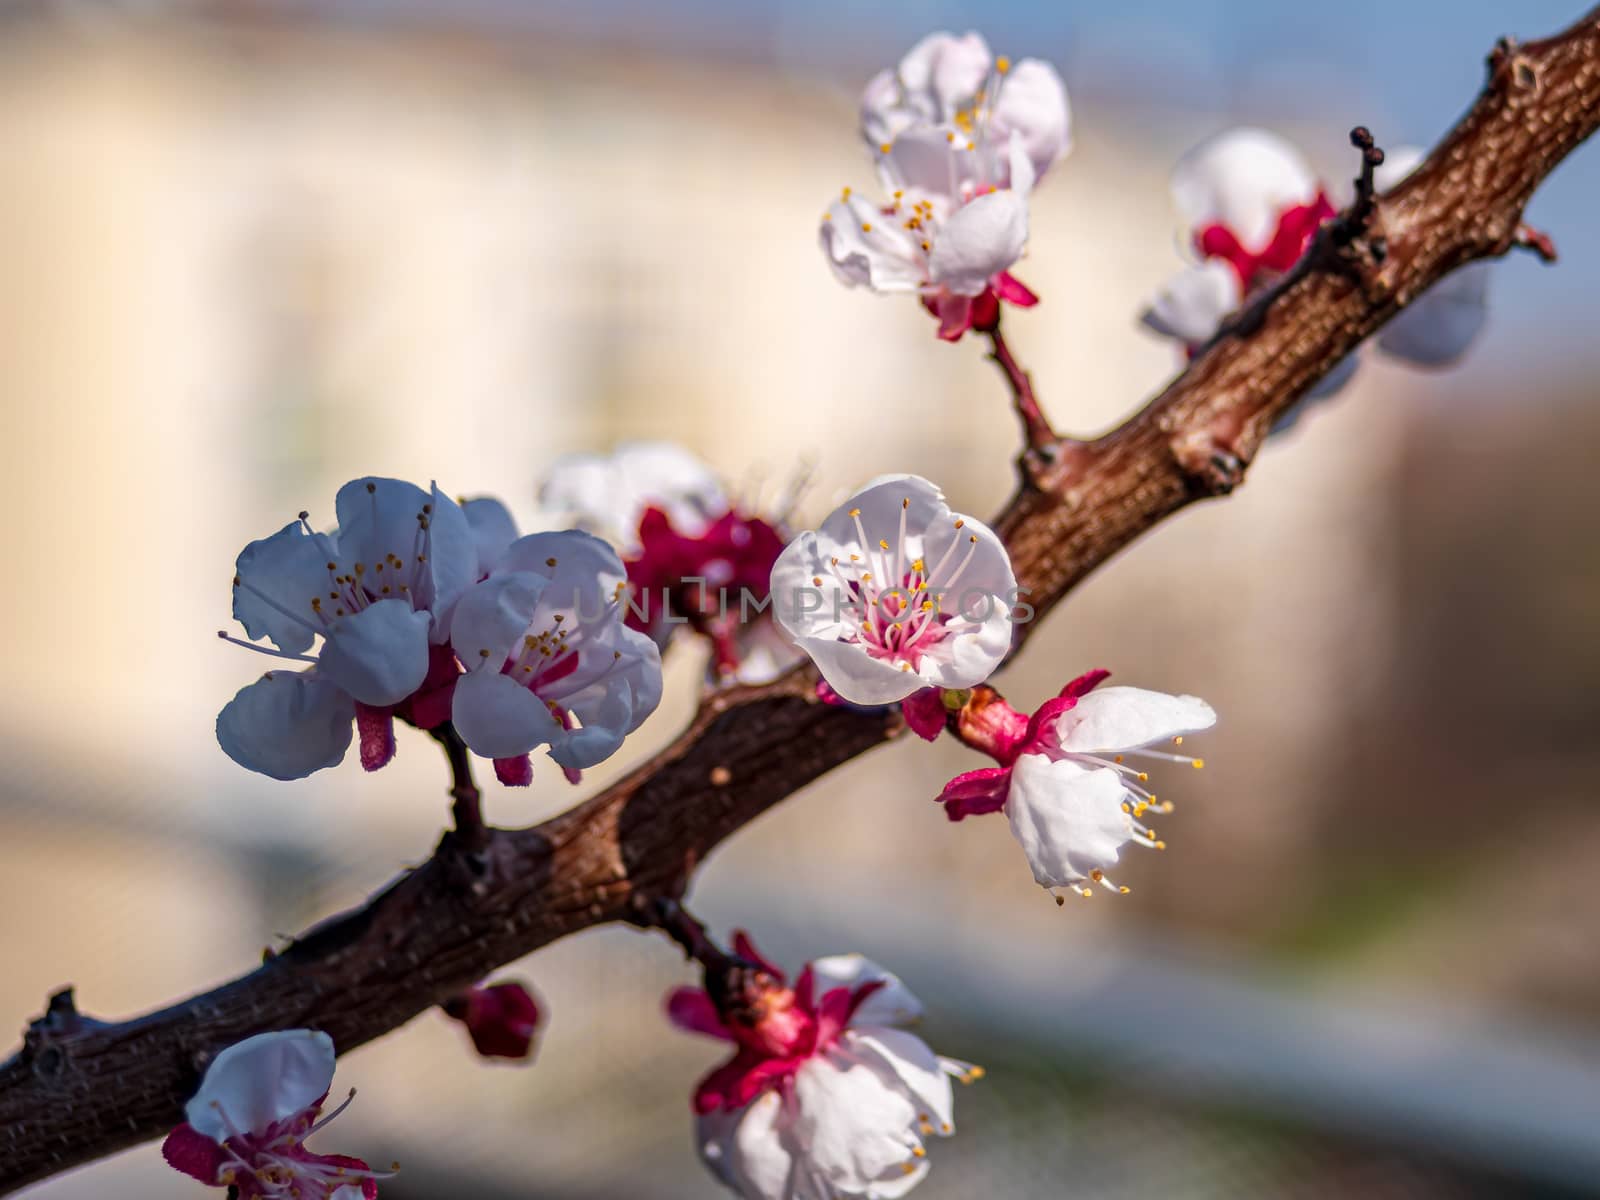 Detail view of a flowering apricot tree branch by Umtsga